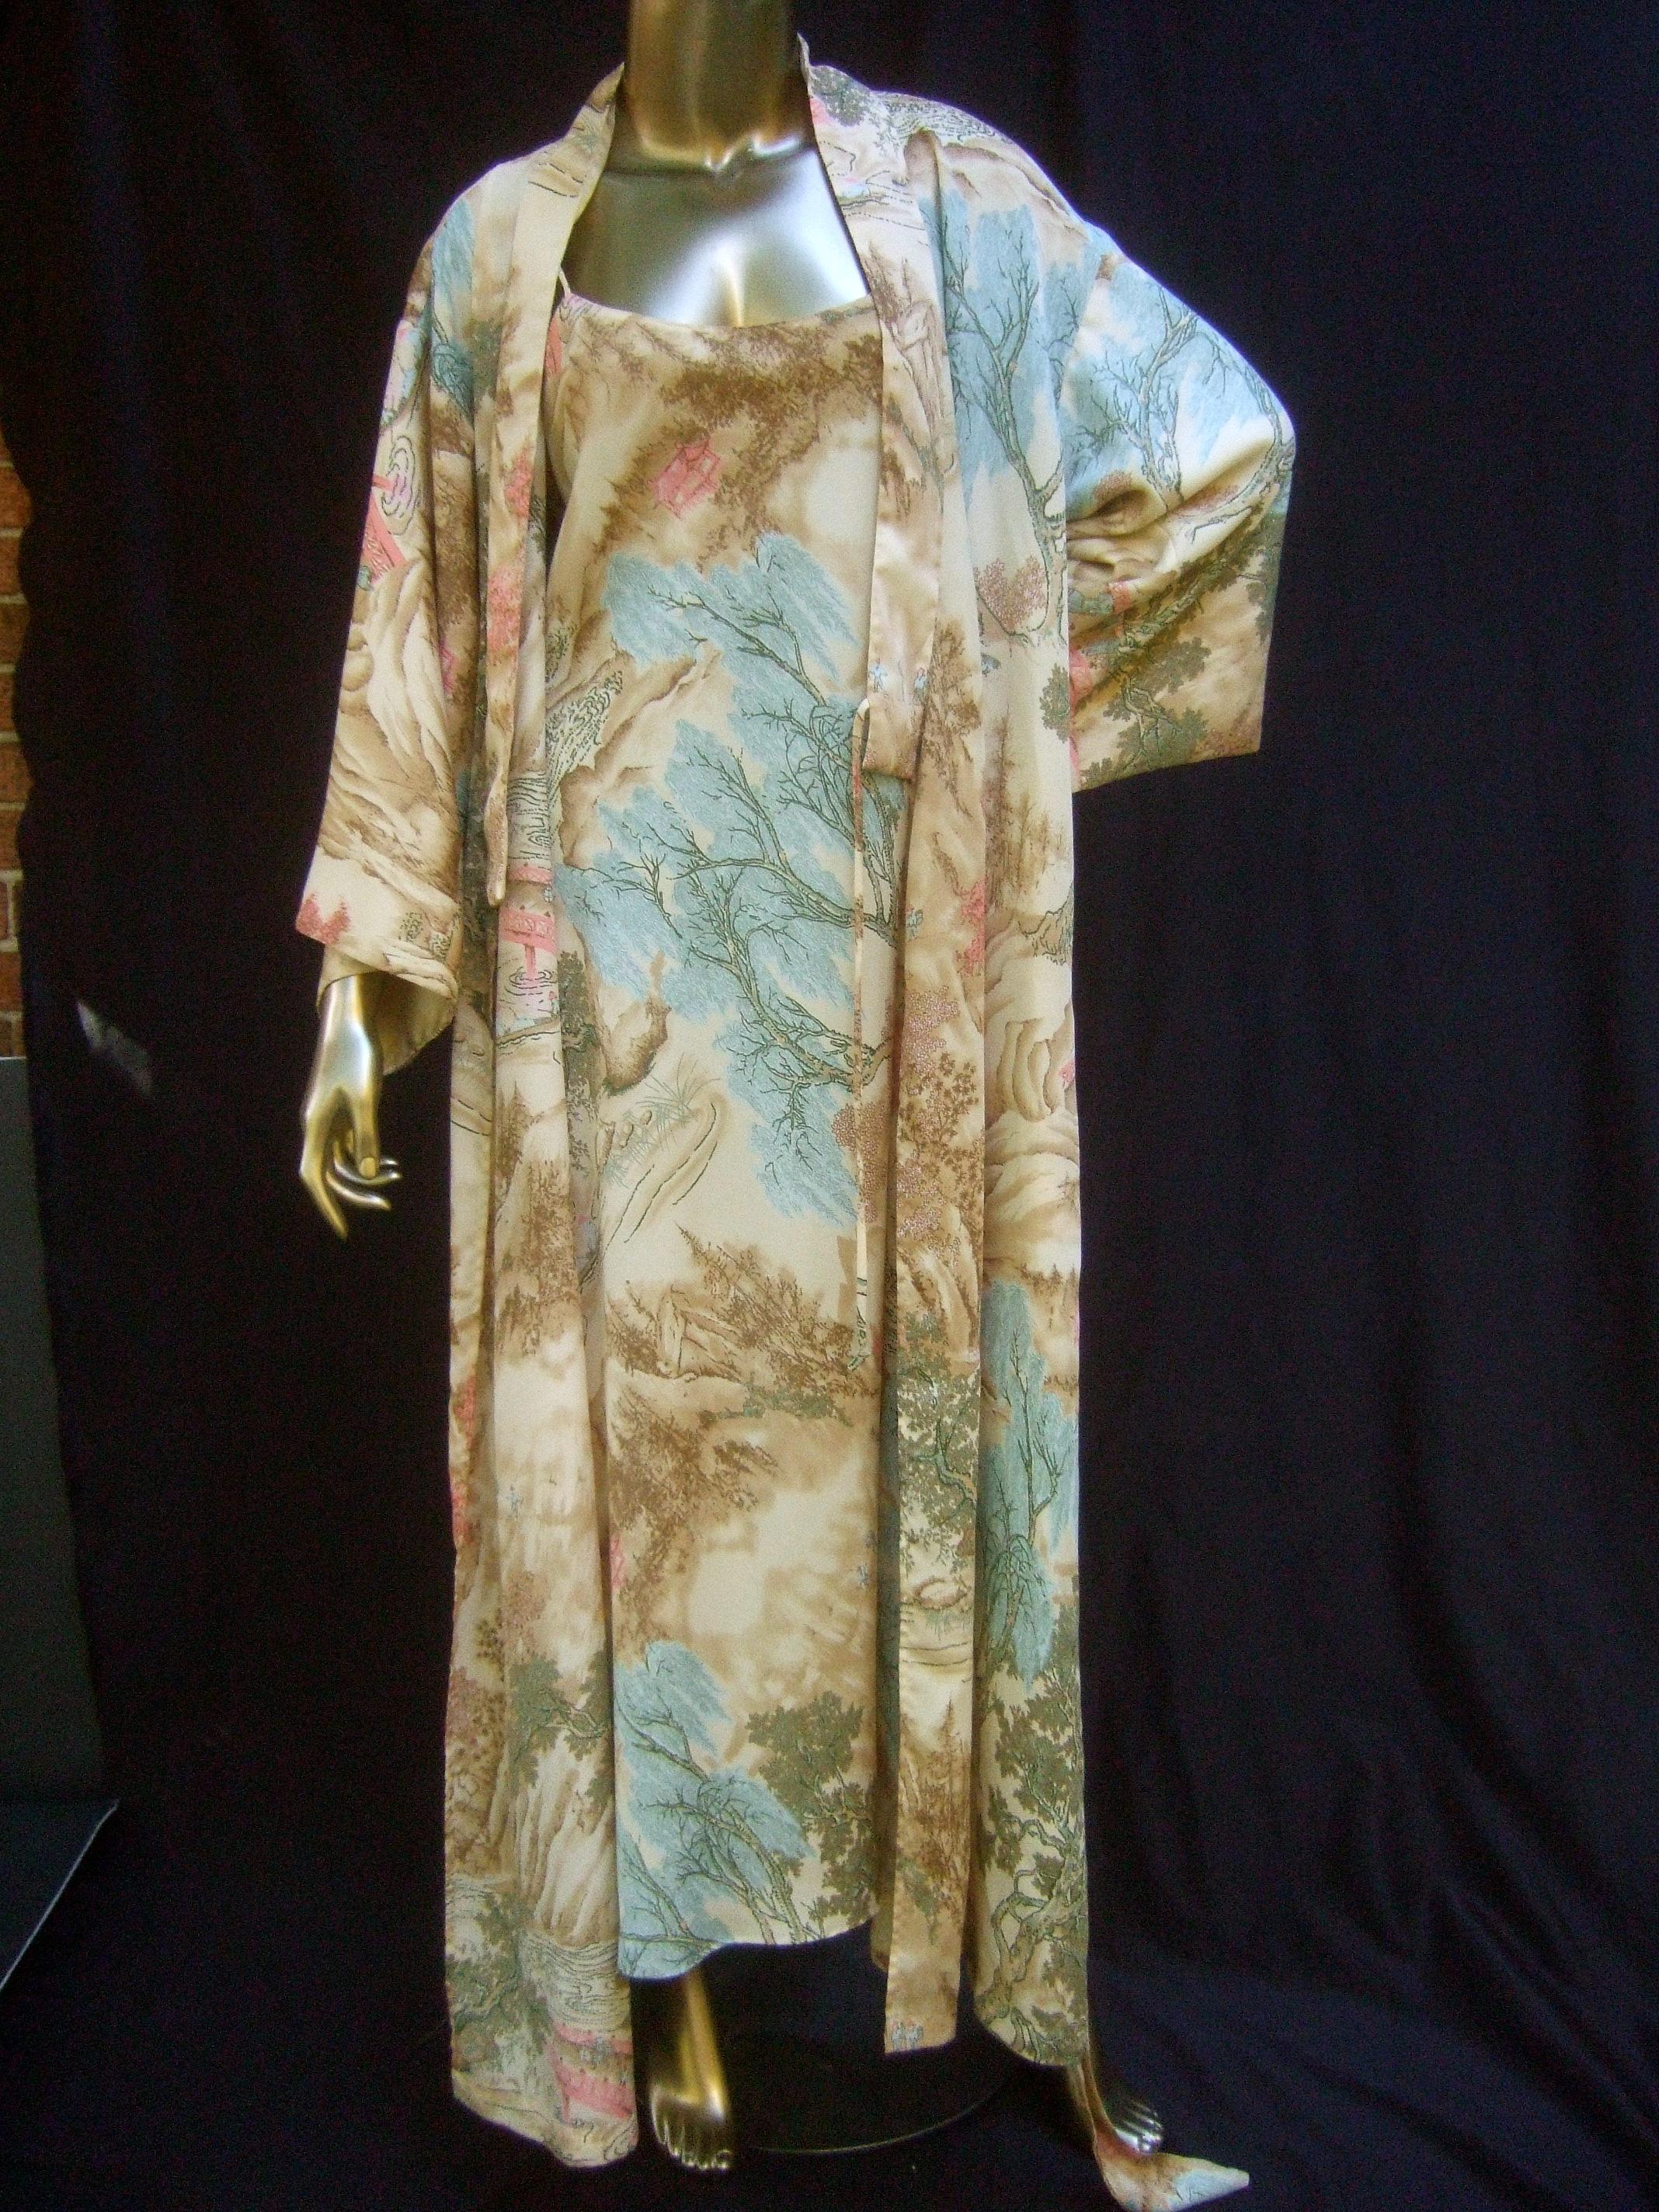 Natori Asian print peignoir duster robe & slip gown ensemble Size M
The luxurious silky duster robe & matching slip gown lingerie 
are illustrated with a Japanese outdoor scene with lush foliage

Set within the outdoor scene are sporadic figures